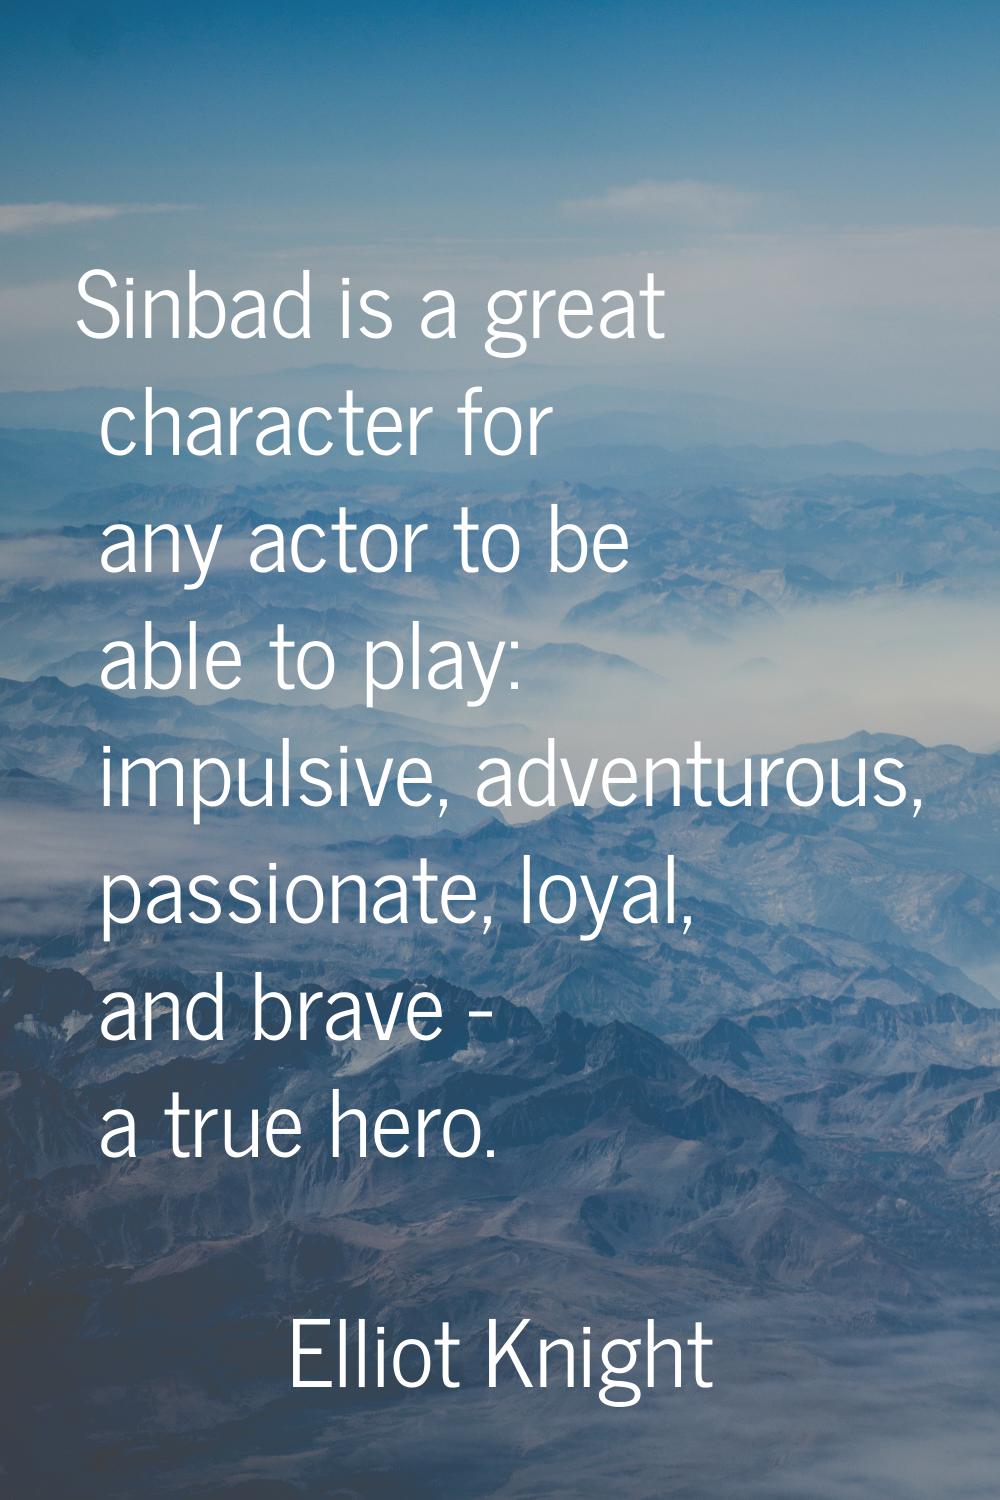 Sinbad is a great character for any actor to be able to play: impulsive, adventurous, passionate, l